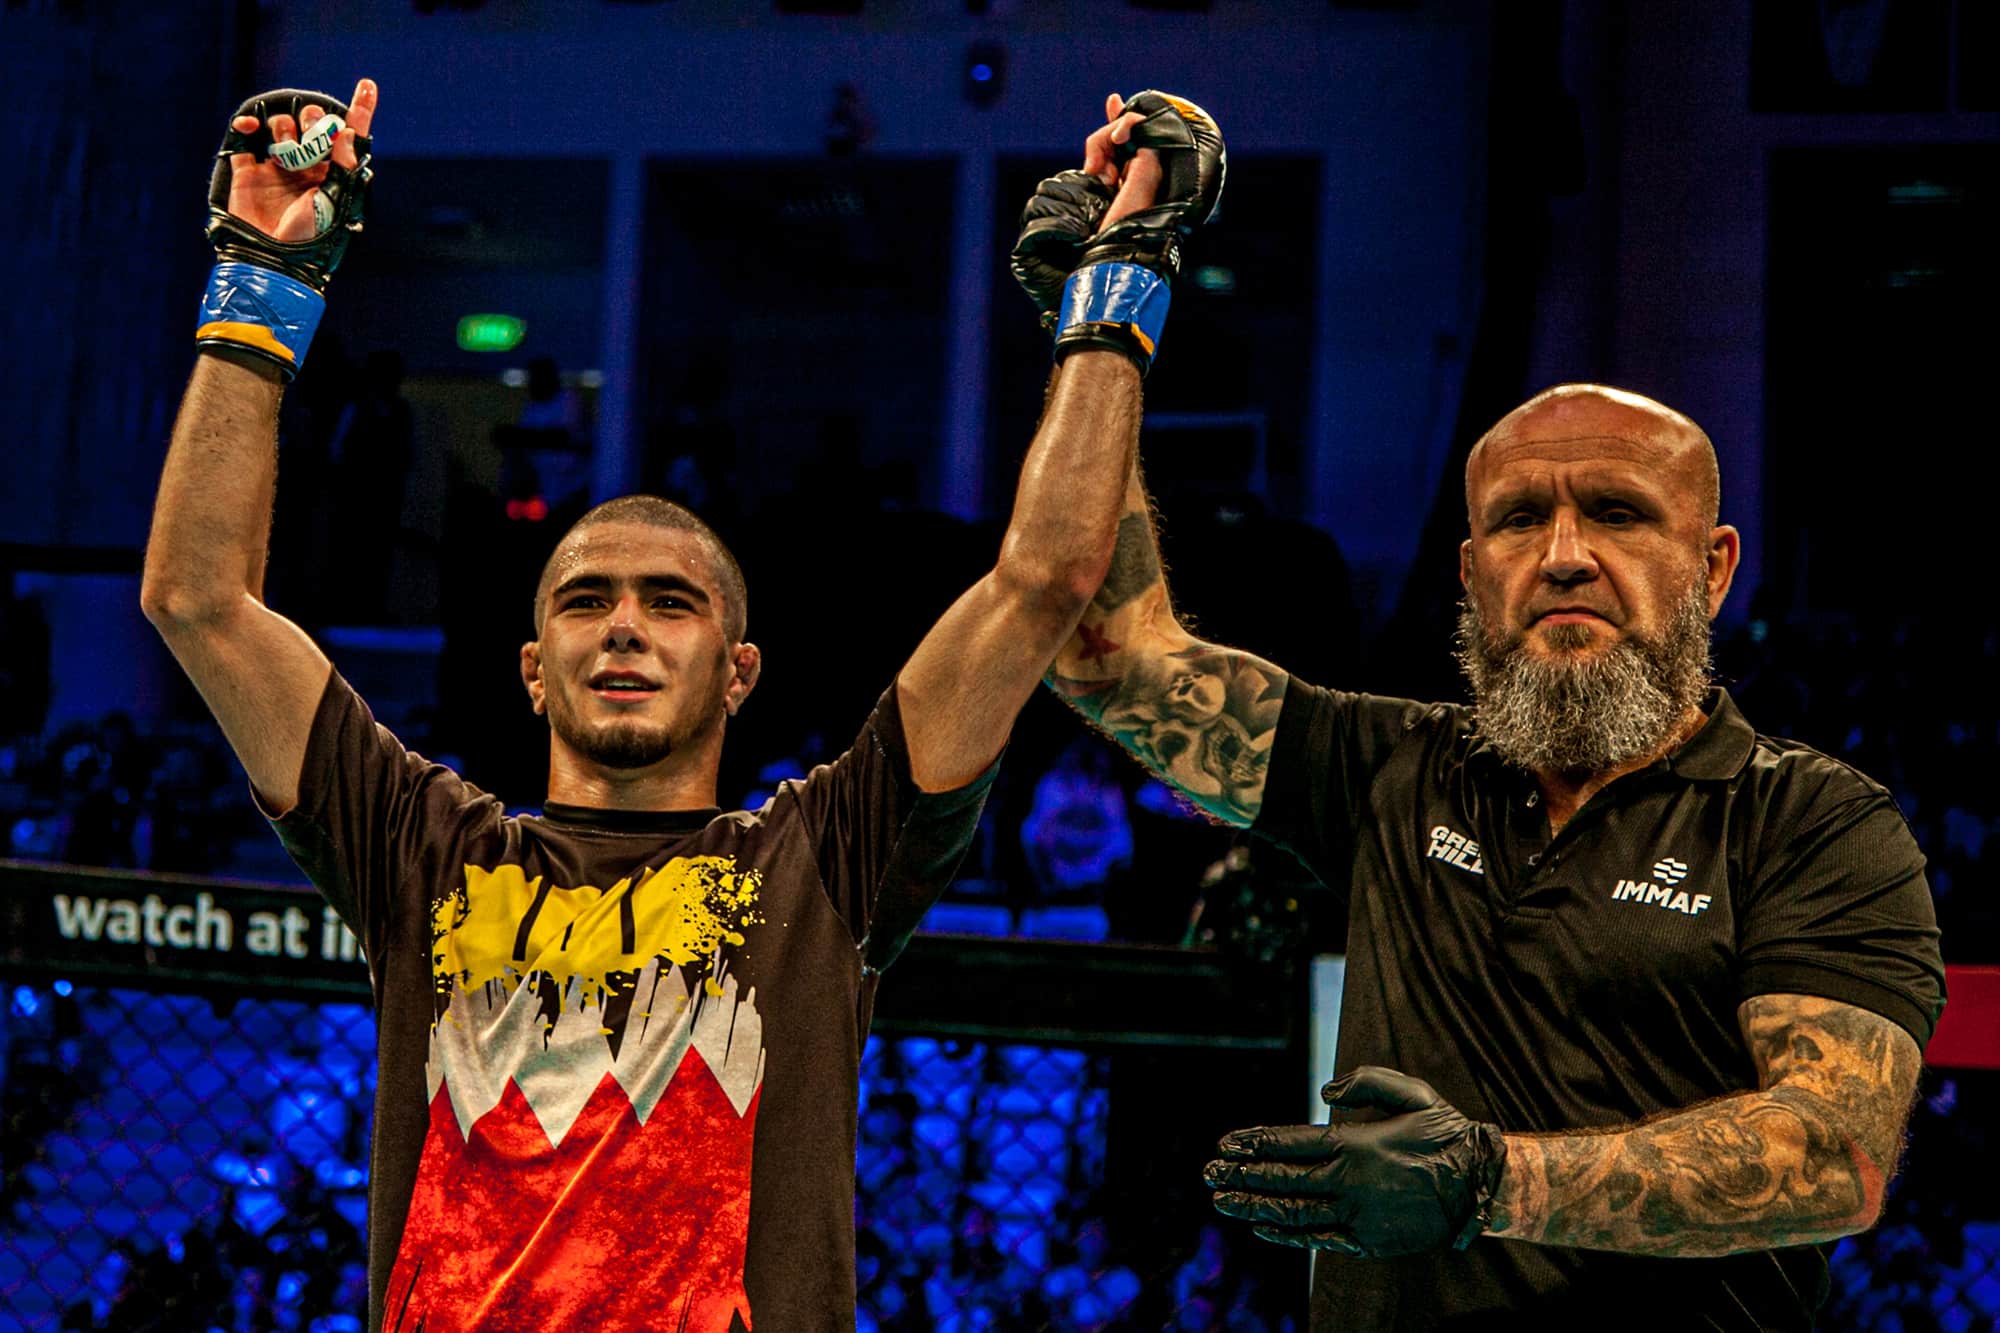 Best Junior nominees announced for 2020 IMMAF amateur MMA Awards